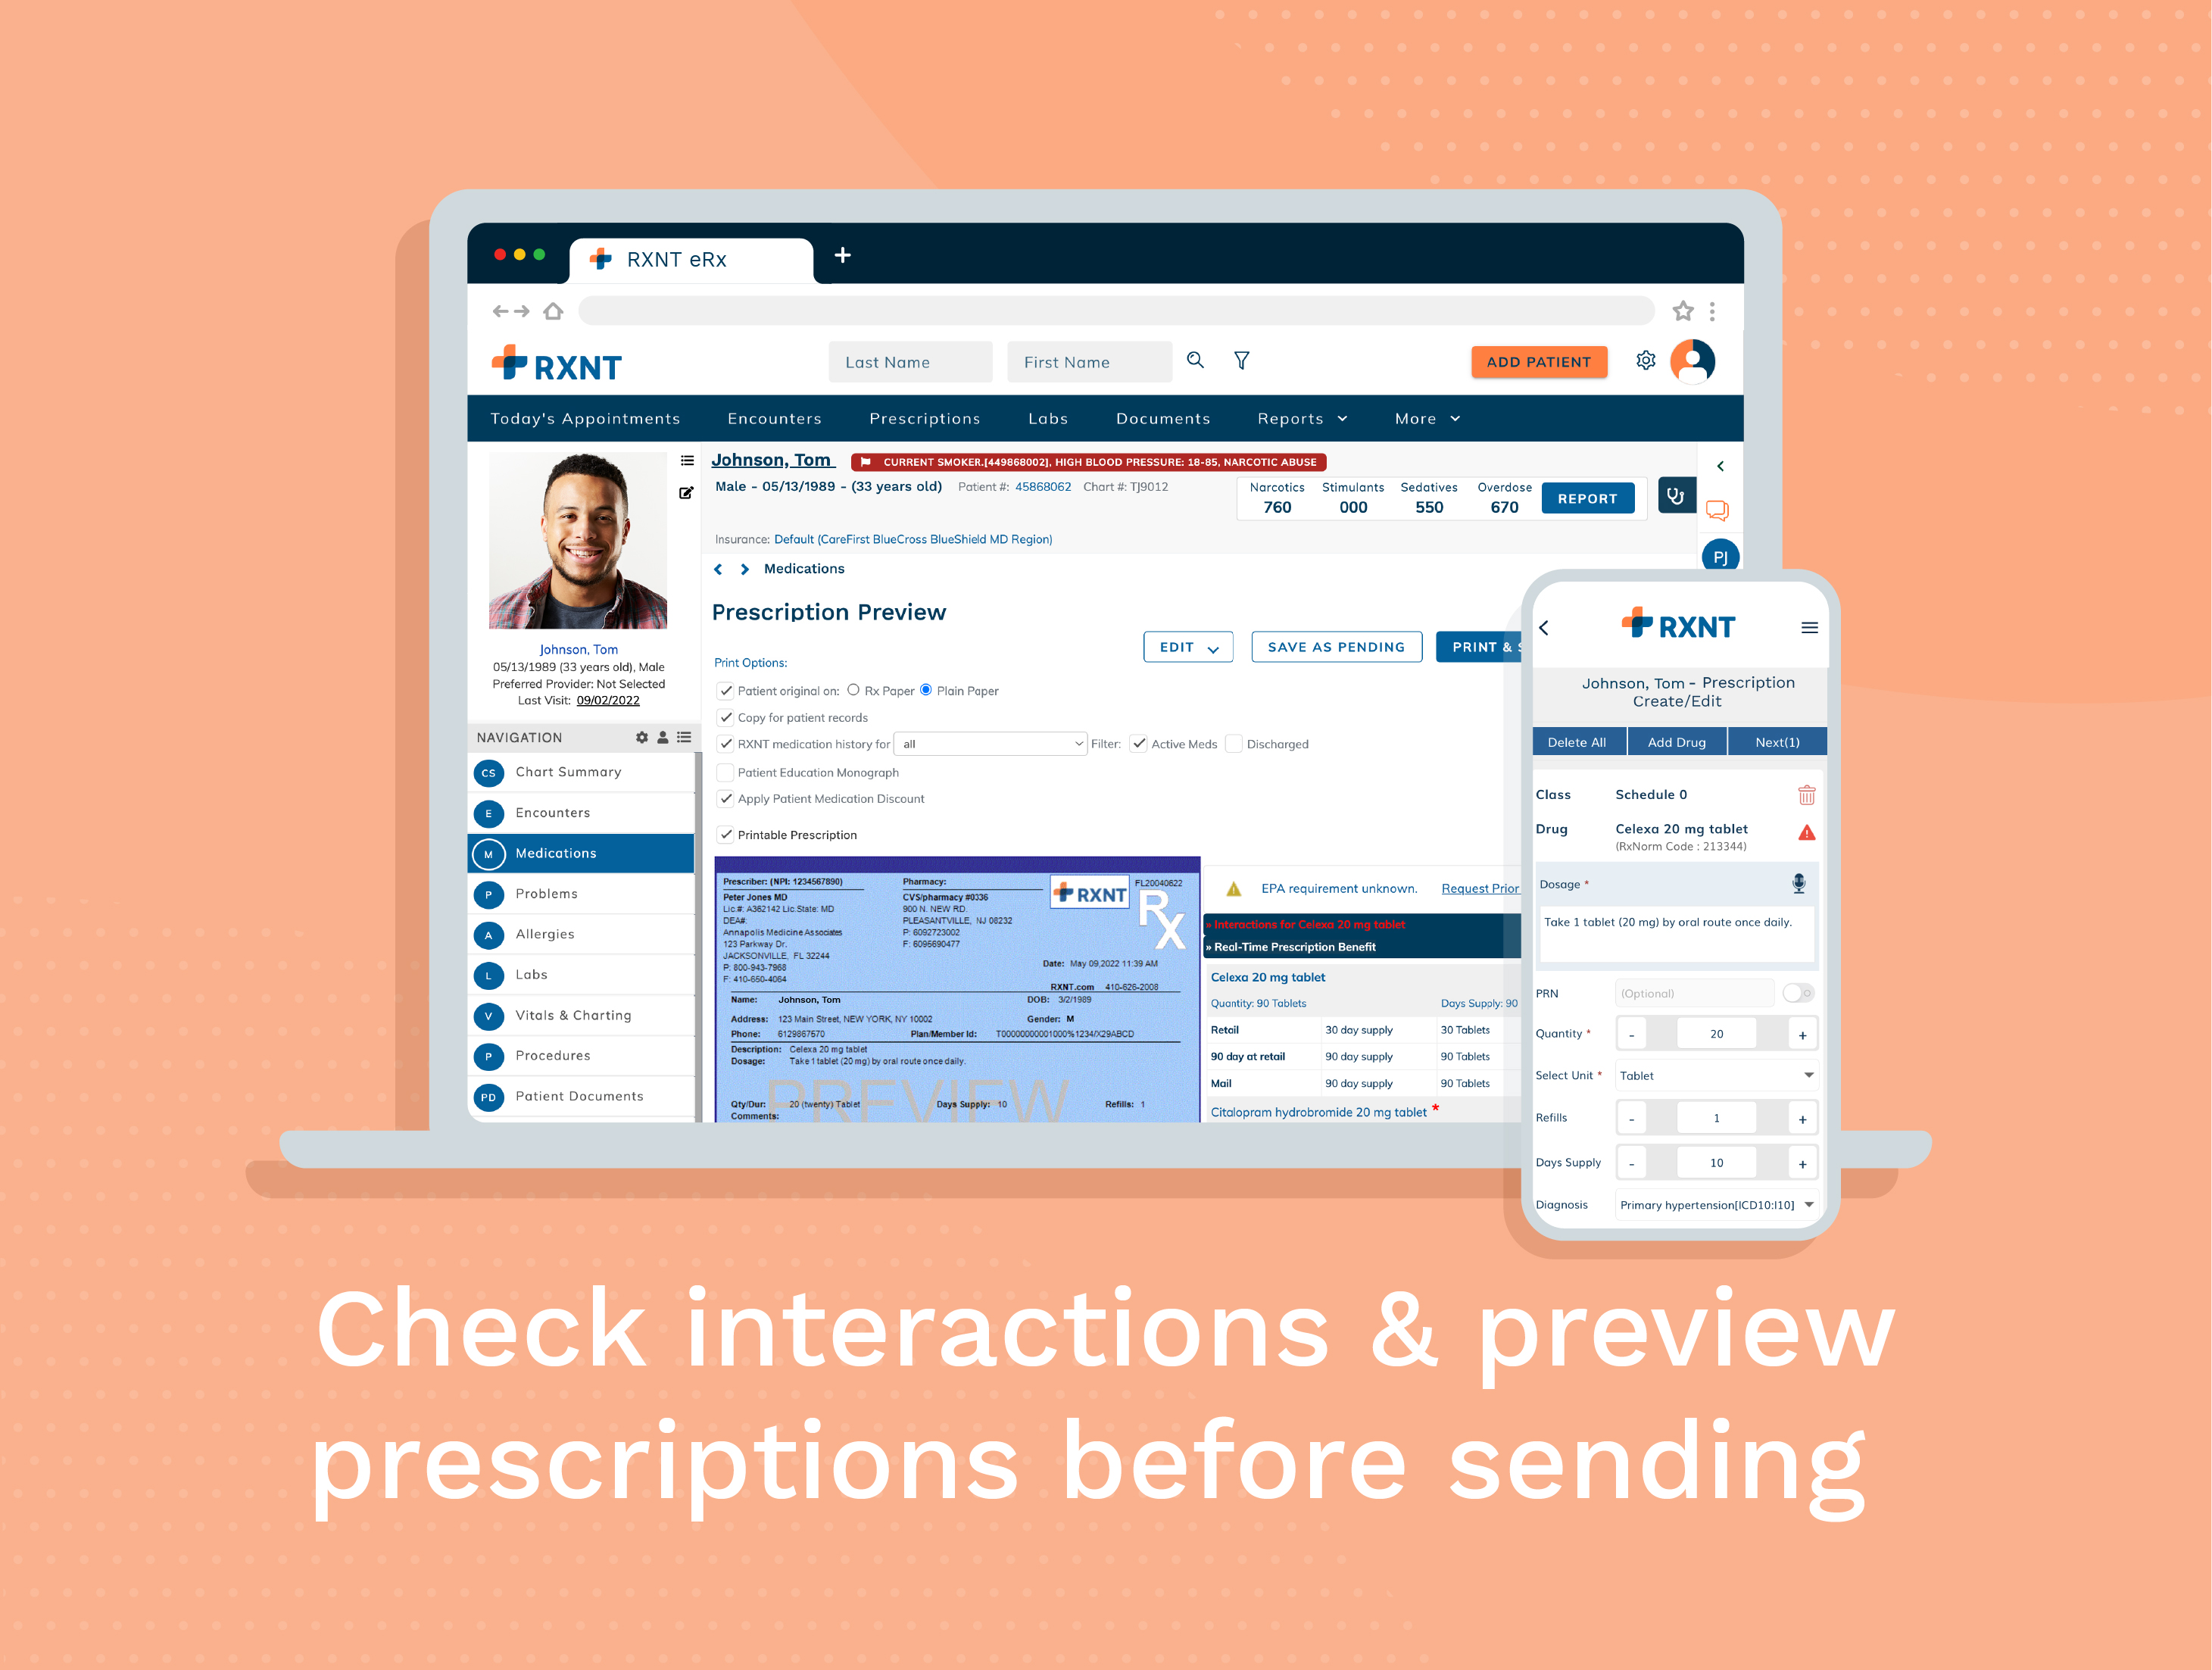 RXNT E-Prescribing (ERX) Software. Manage Electronic Prior Authorizations (ePA) and Real-Time Prescription Benefit (RTPB) at a glance. Check interactions & preview your prescriptions before sending. Available for desktop, tablet, & mobile (iOS & Android).